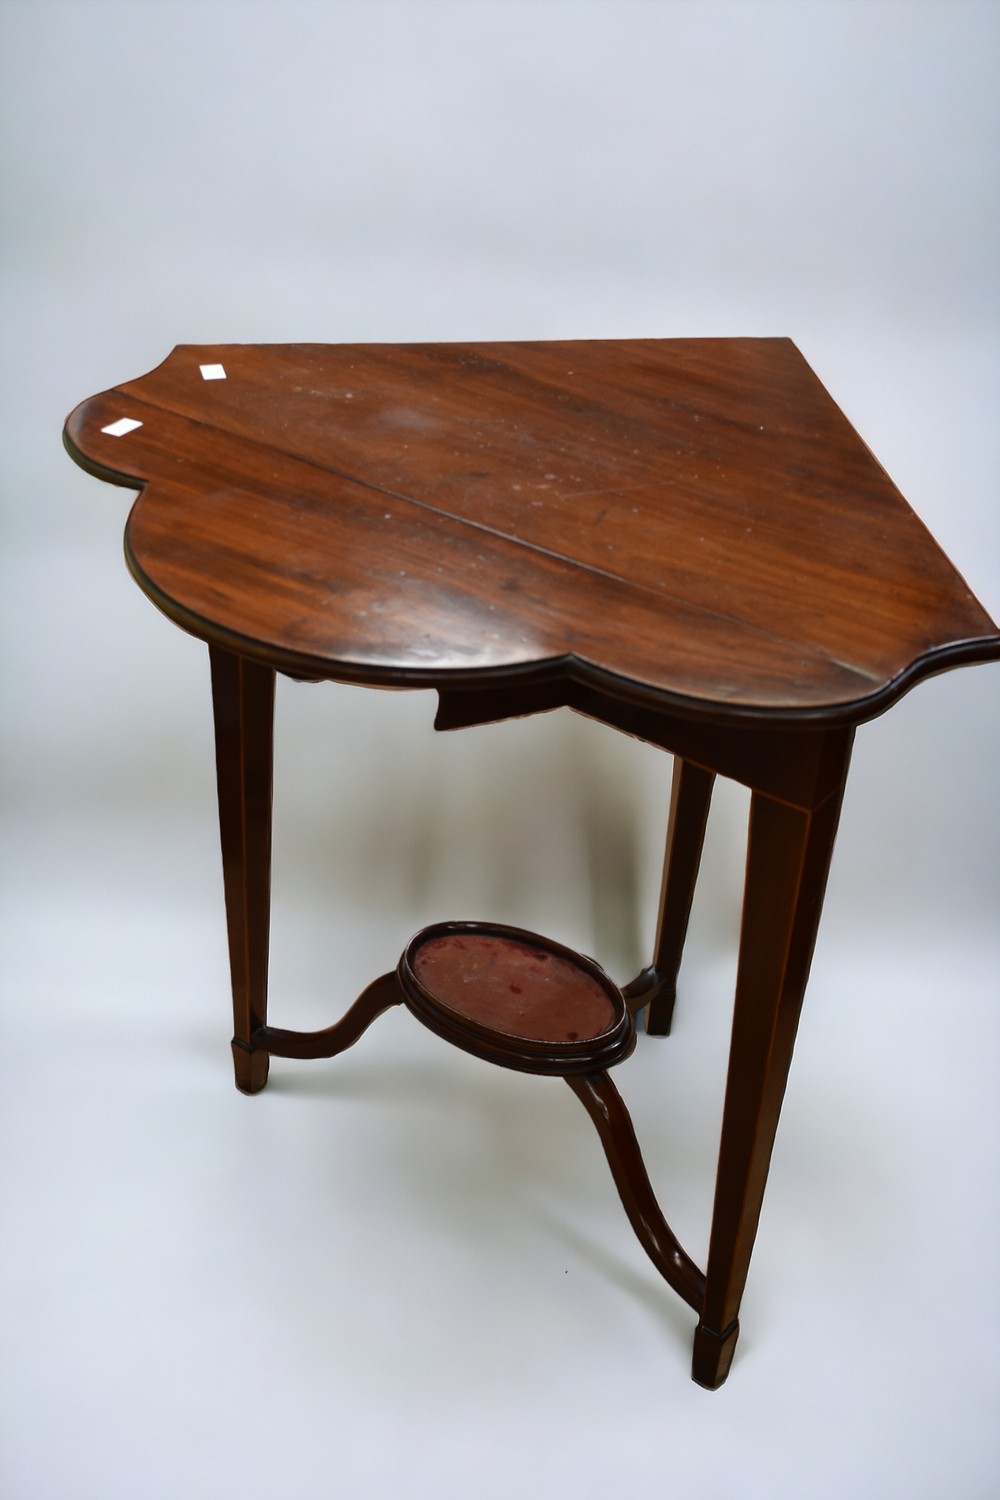 A 19th Century mahogany drop front corner table/stand on inlayed sabre legs. - Image 2 of 2